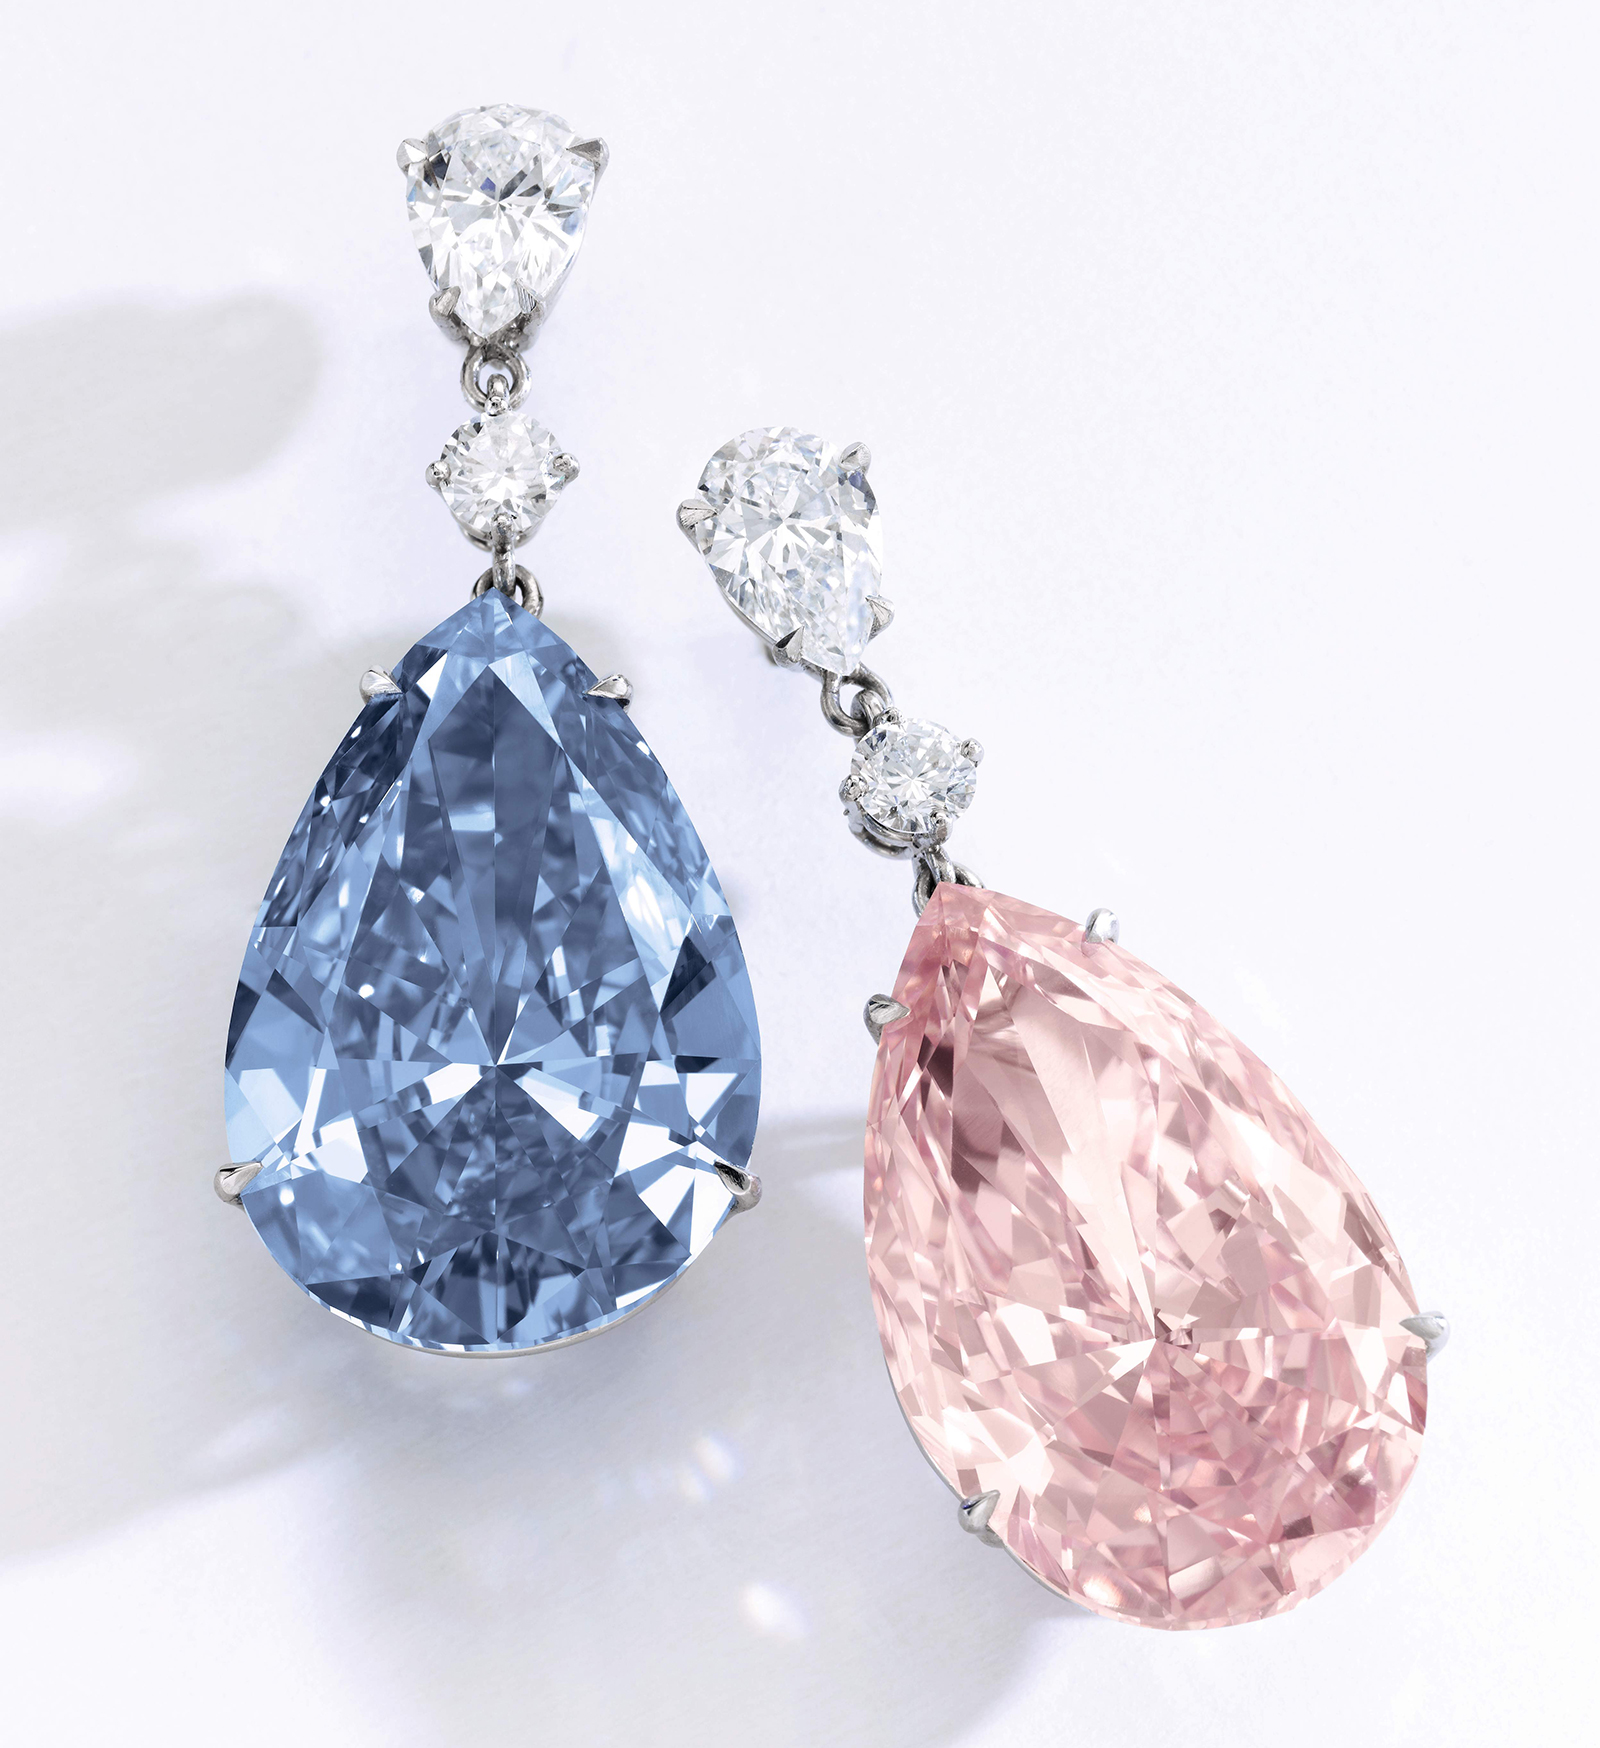 Apollo blue and Artemis pink diamonds on sale at Sotheby's